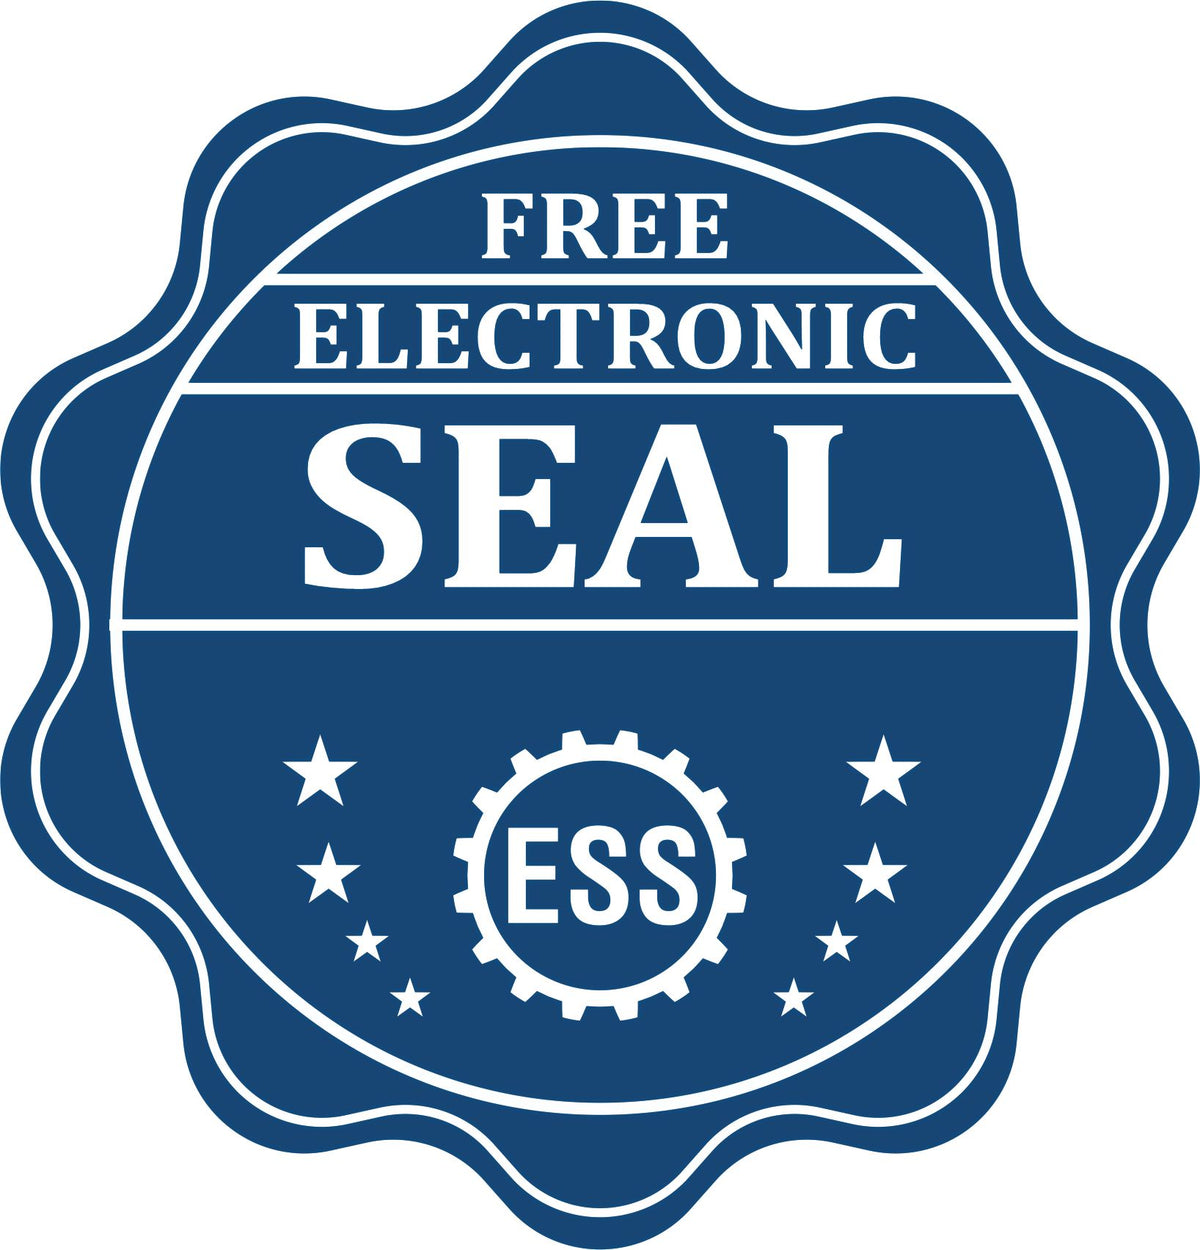 A badge showing a free electronic seal for the Virginia Engineer Desk Seal with stars and the ESS gear on the emblem.